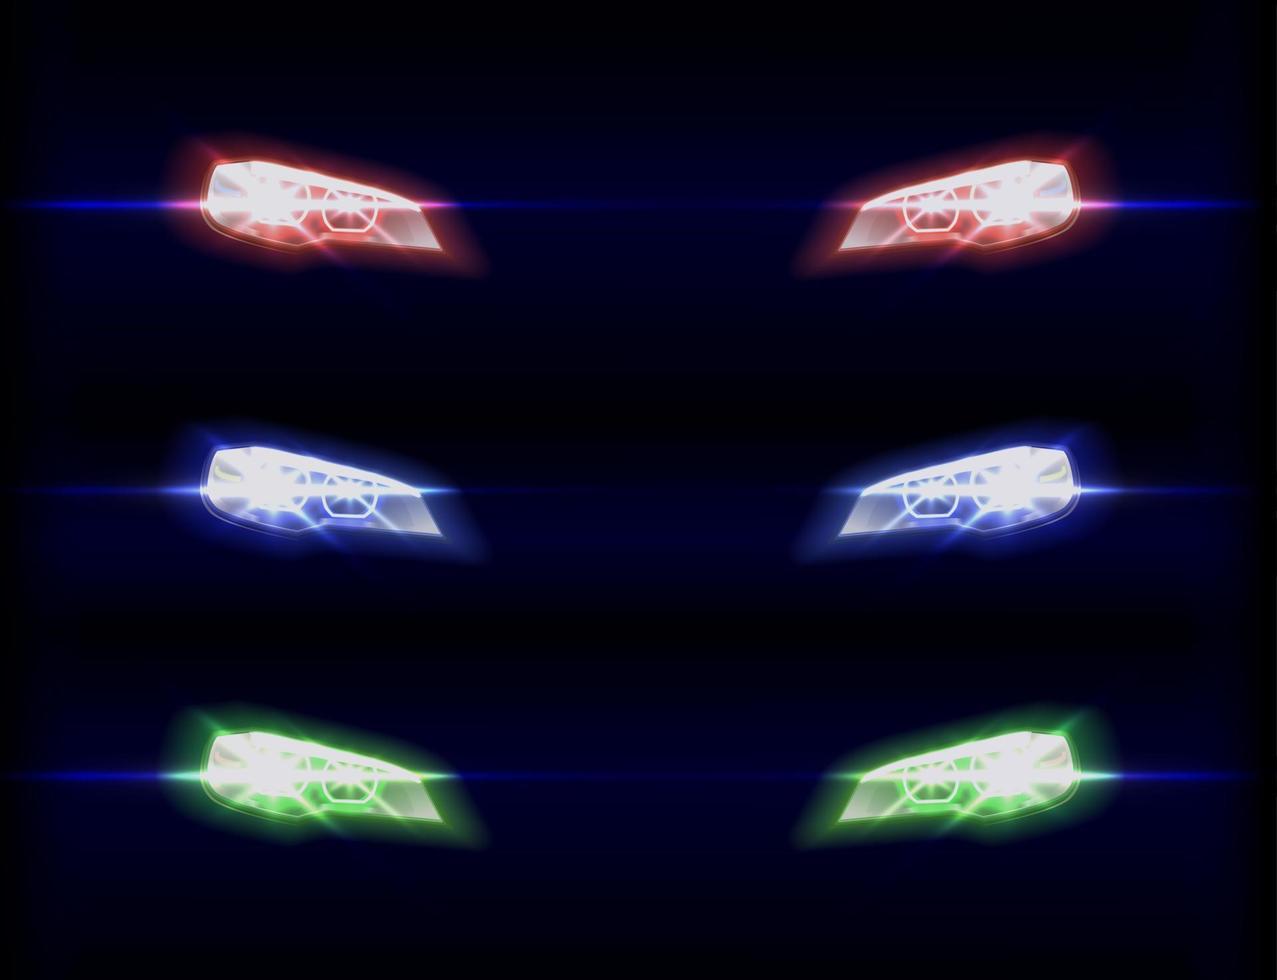 Vector realistic car front lights in different color shades on transparent dark background.